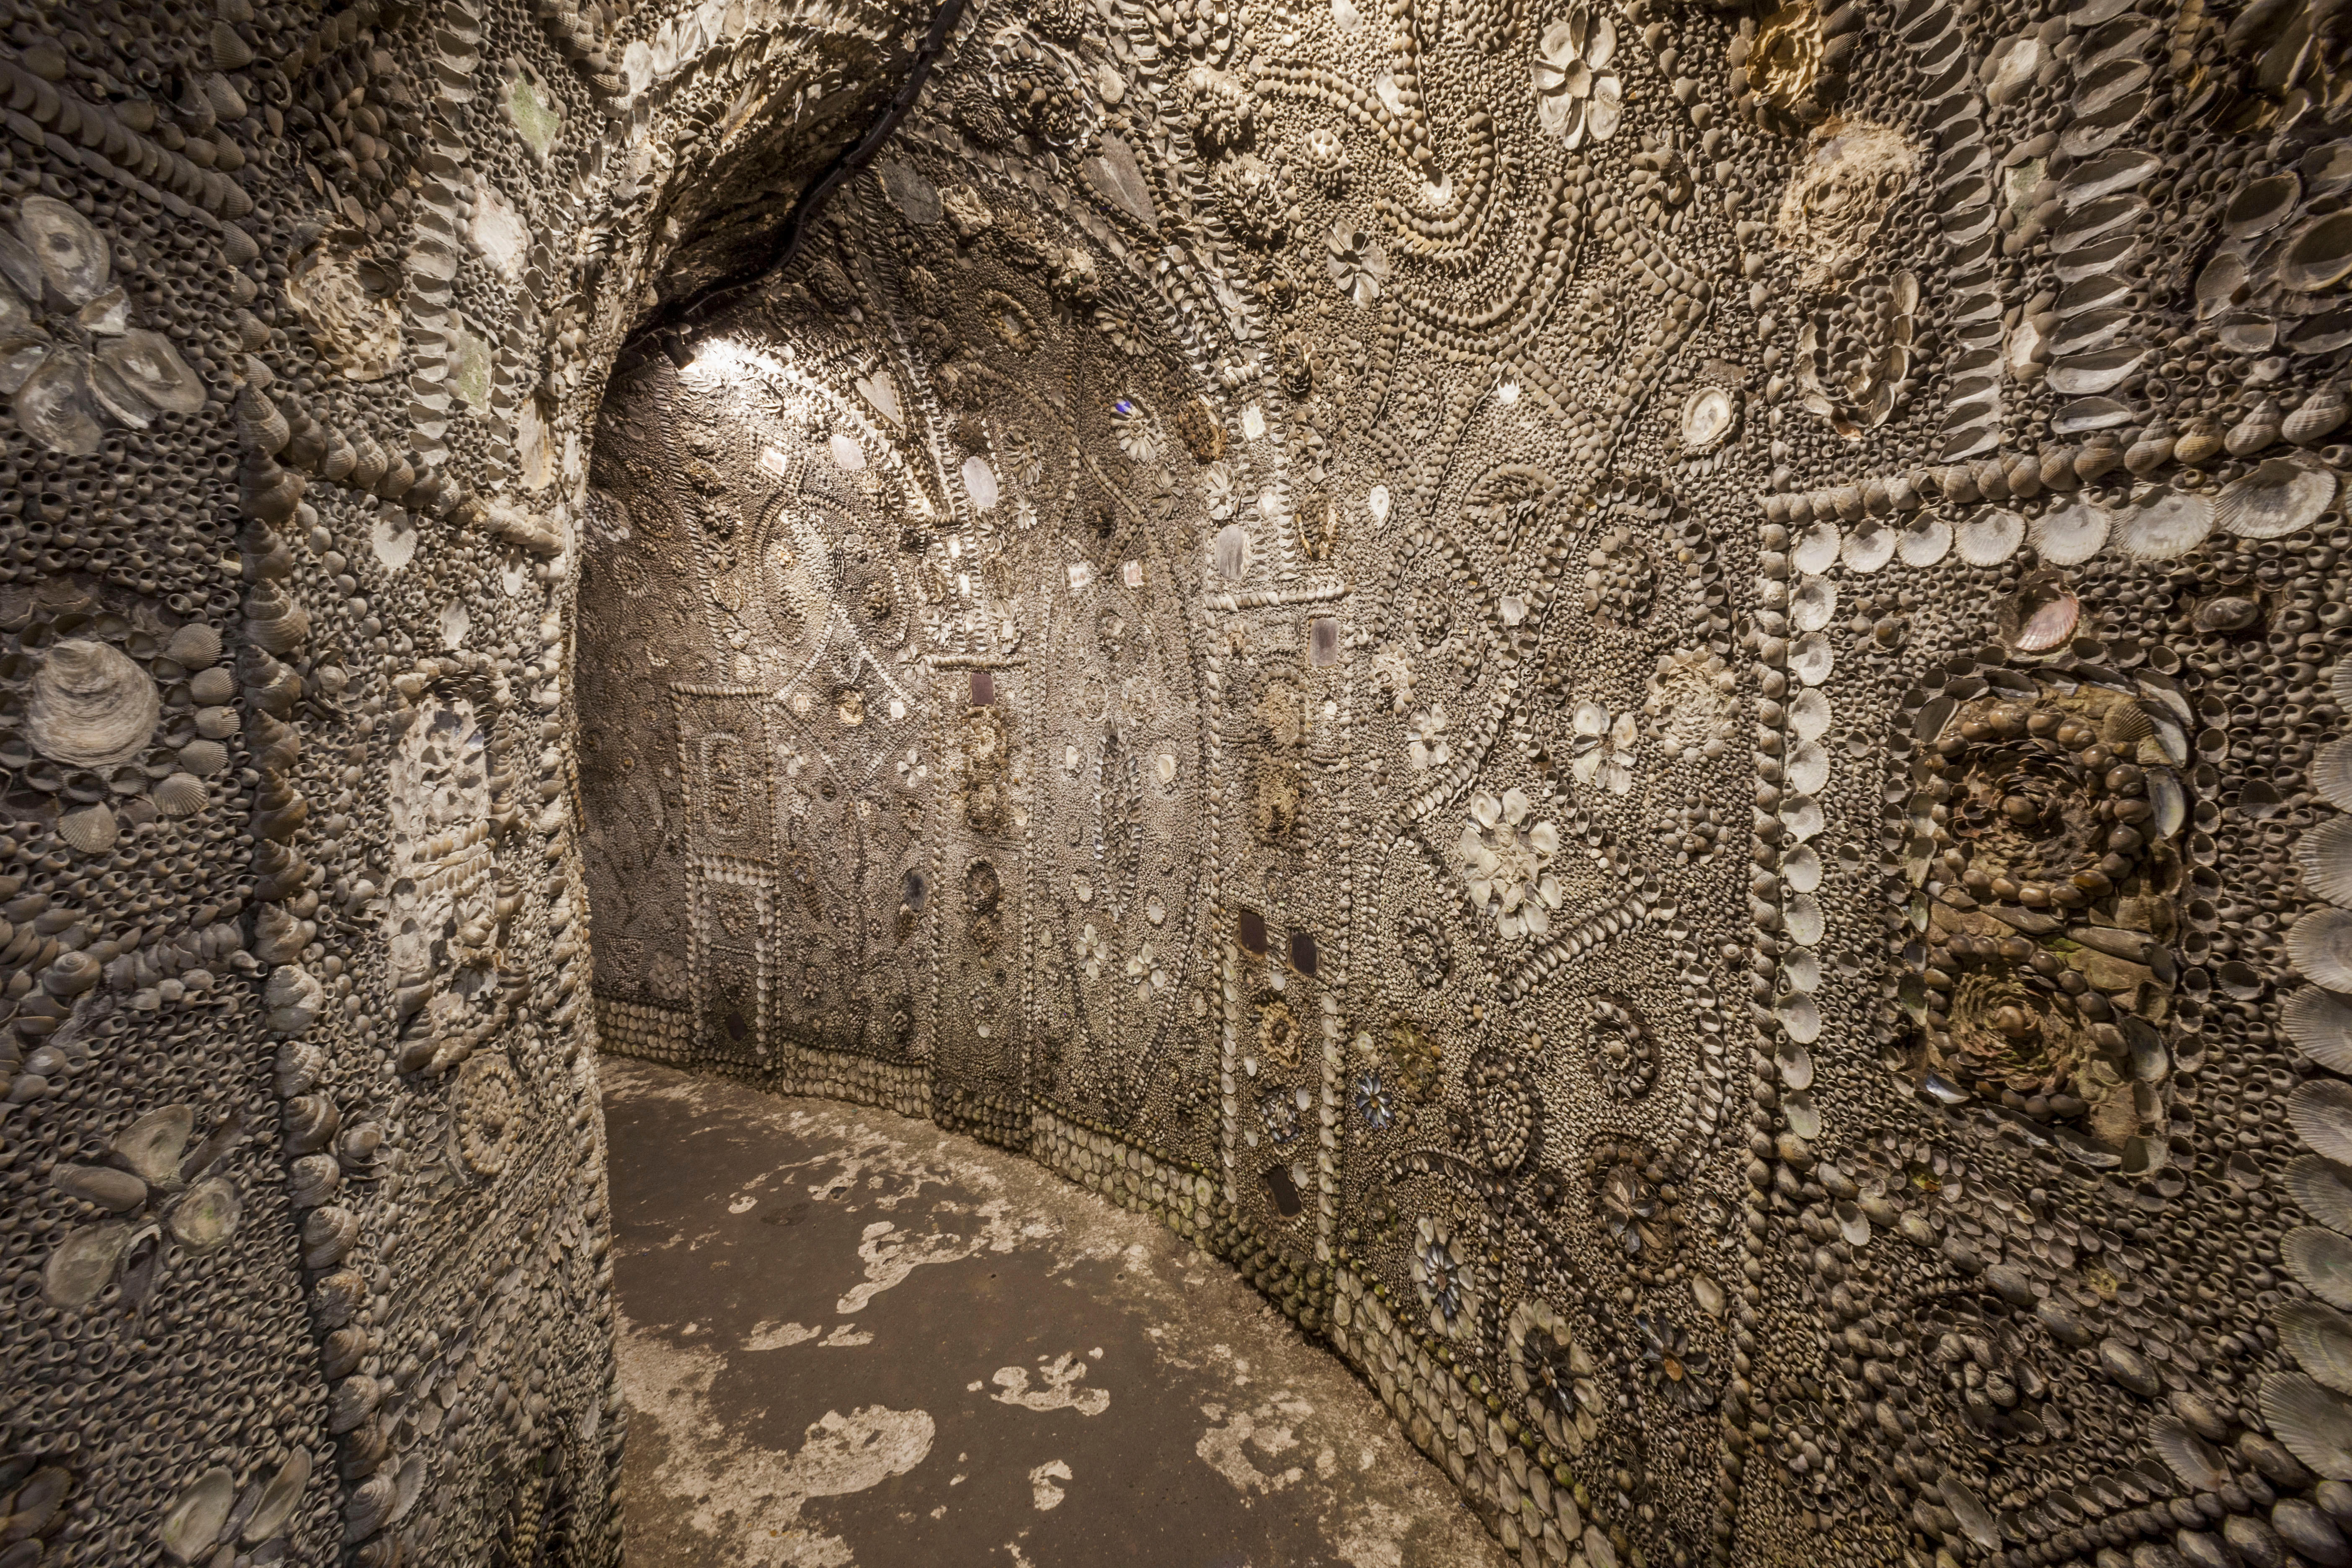 The Shell Grotto is more than 150 years old - but no one knows who built it